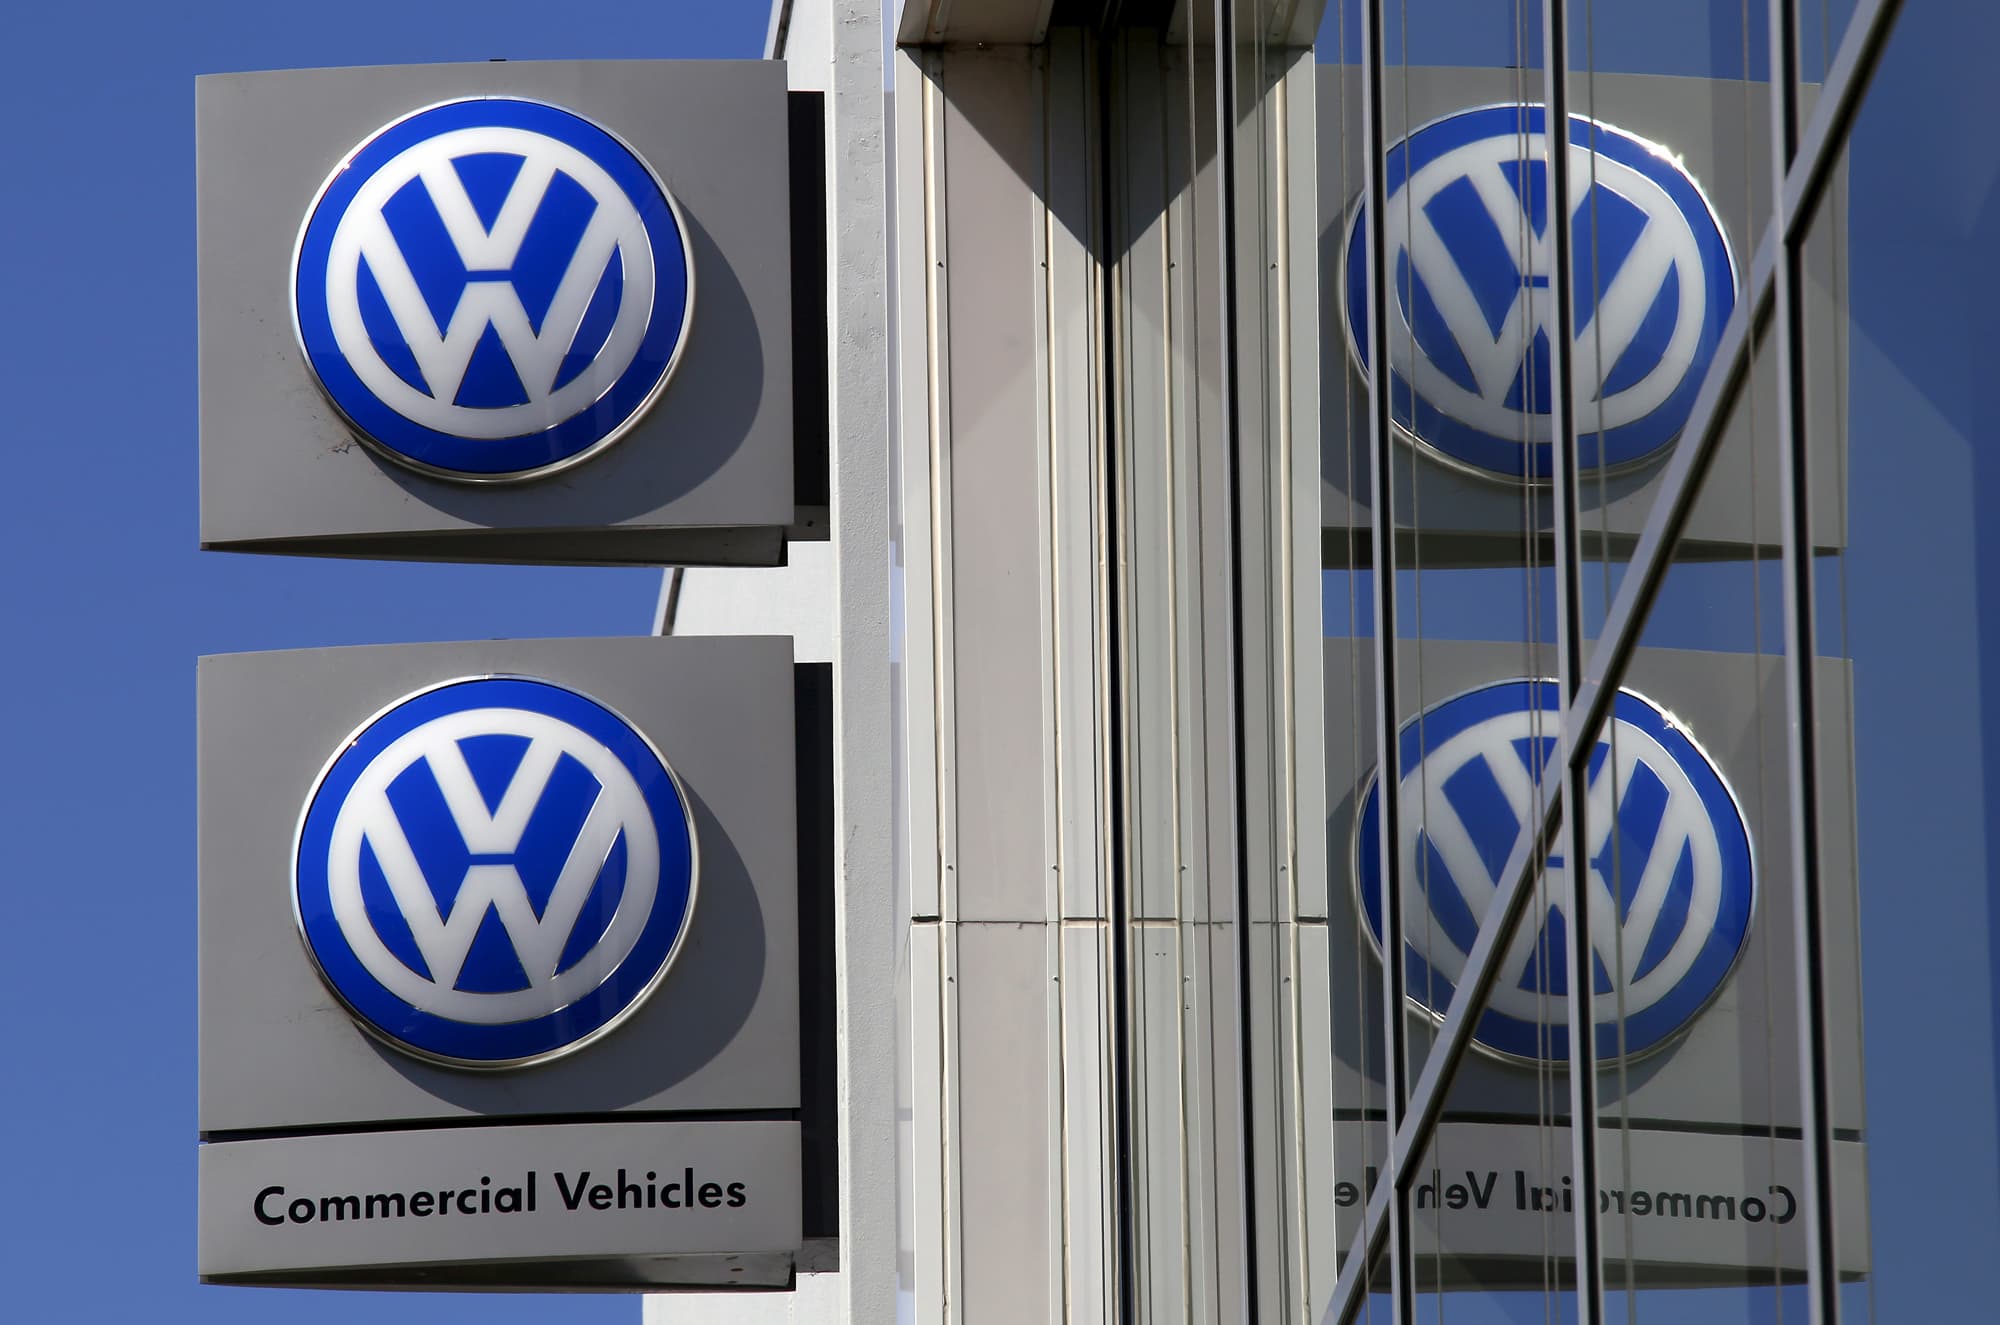 SEC charges Volkswagen and its former CEO with defrauding investors